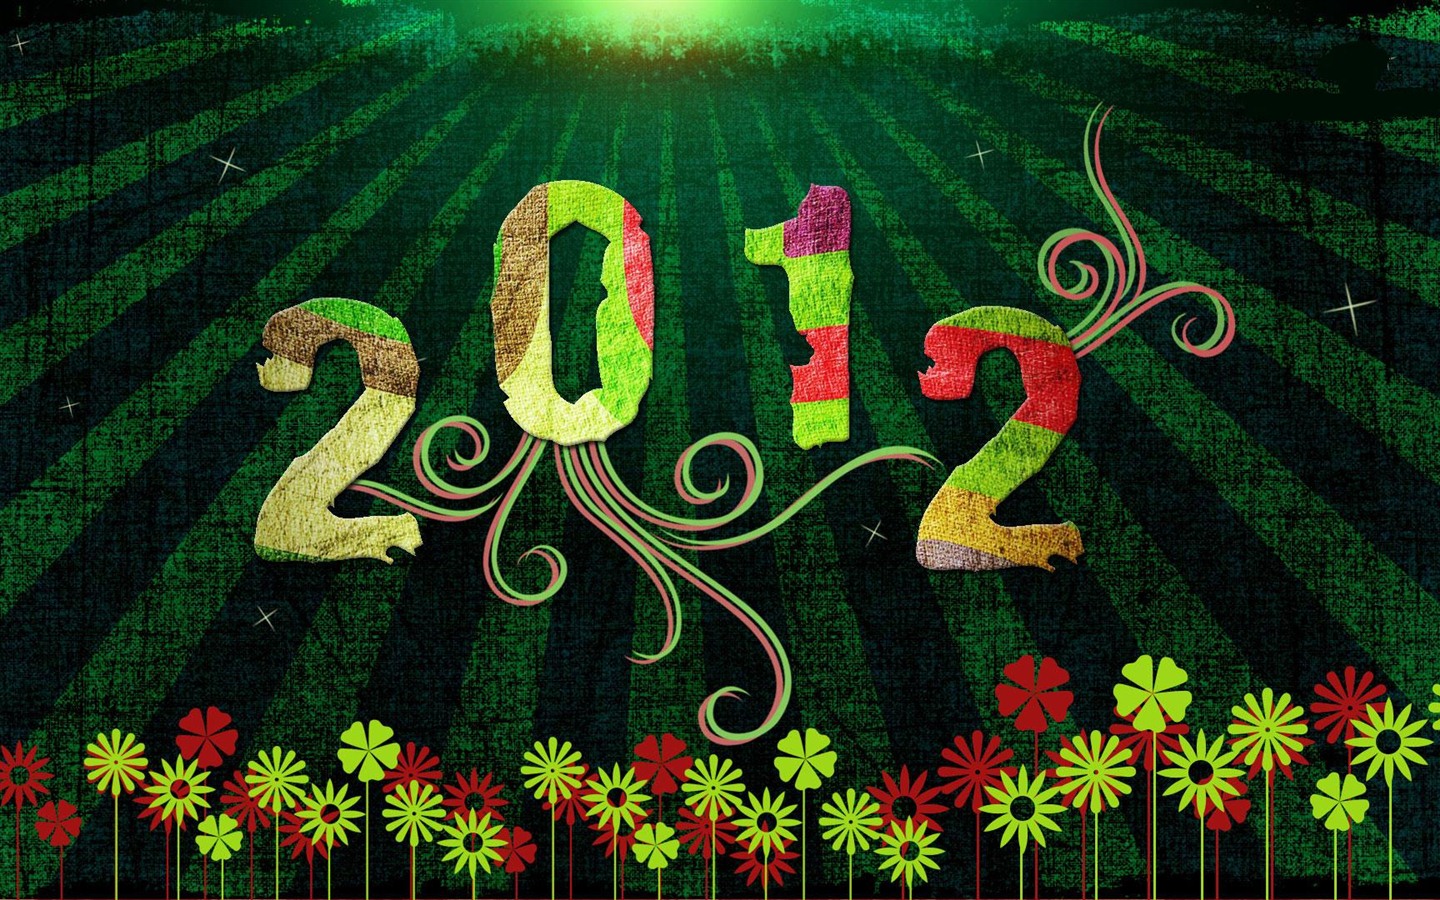 2012 New Year wallpapers (2) #9 - 1440x900